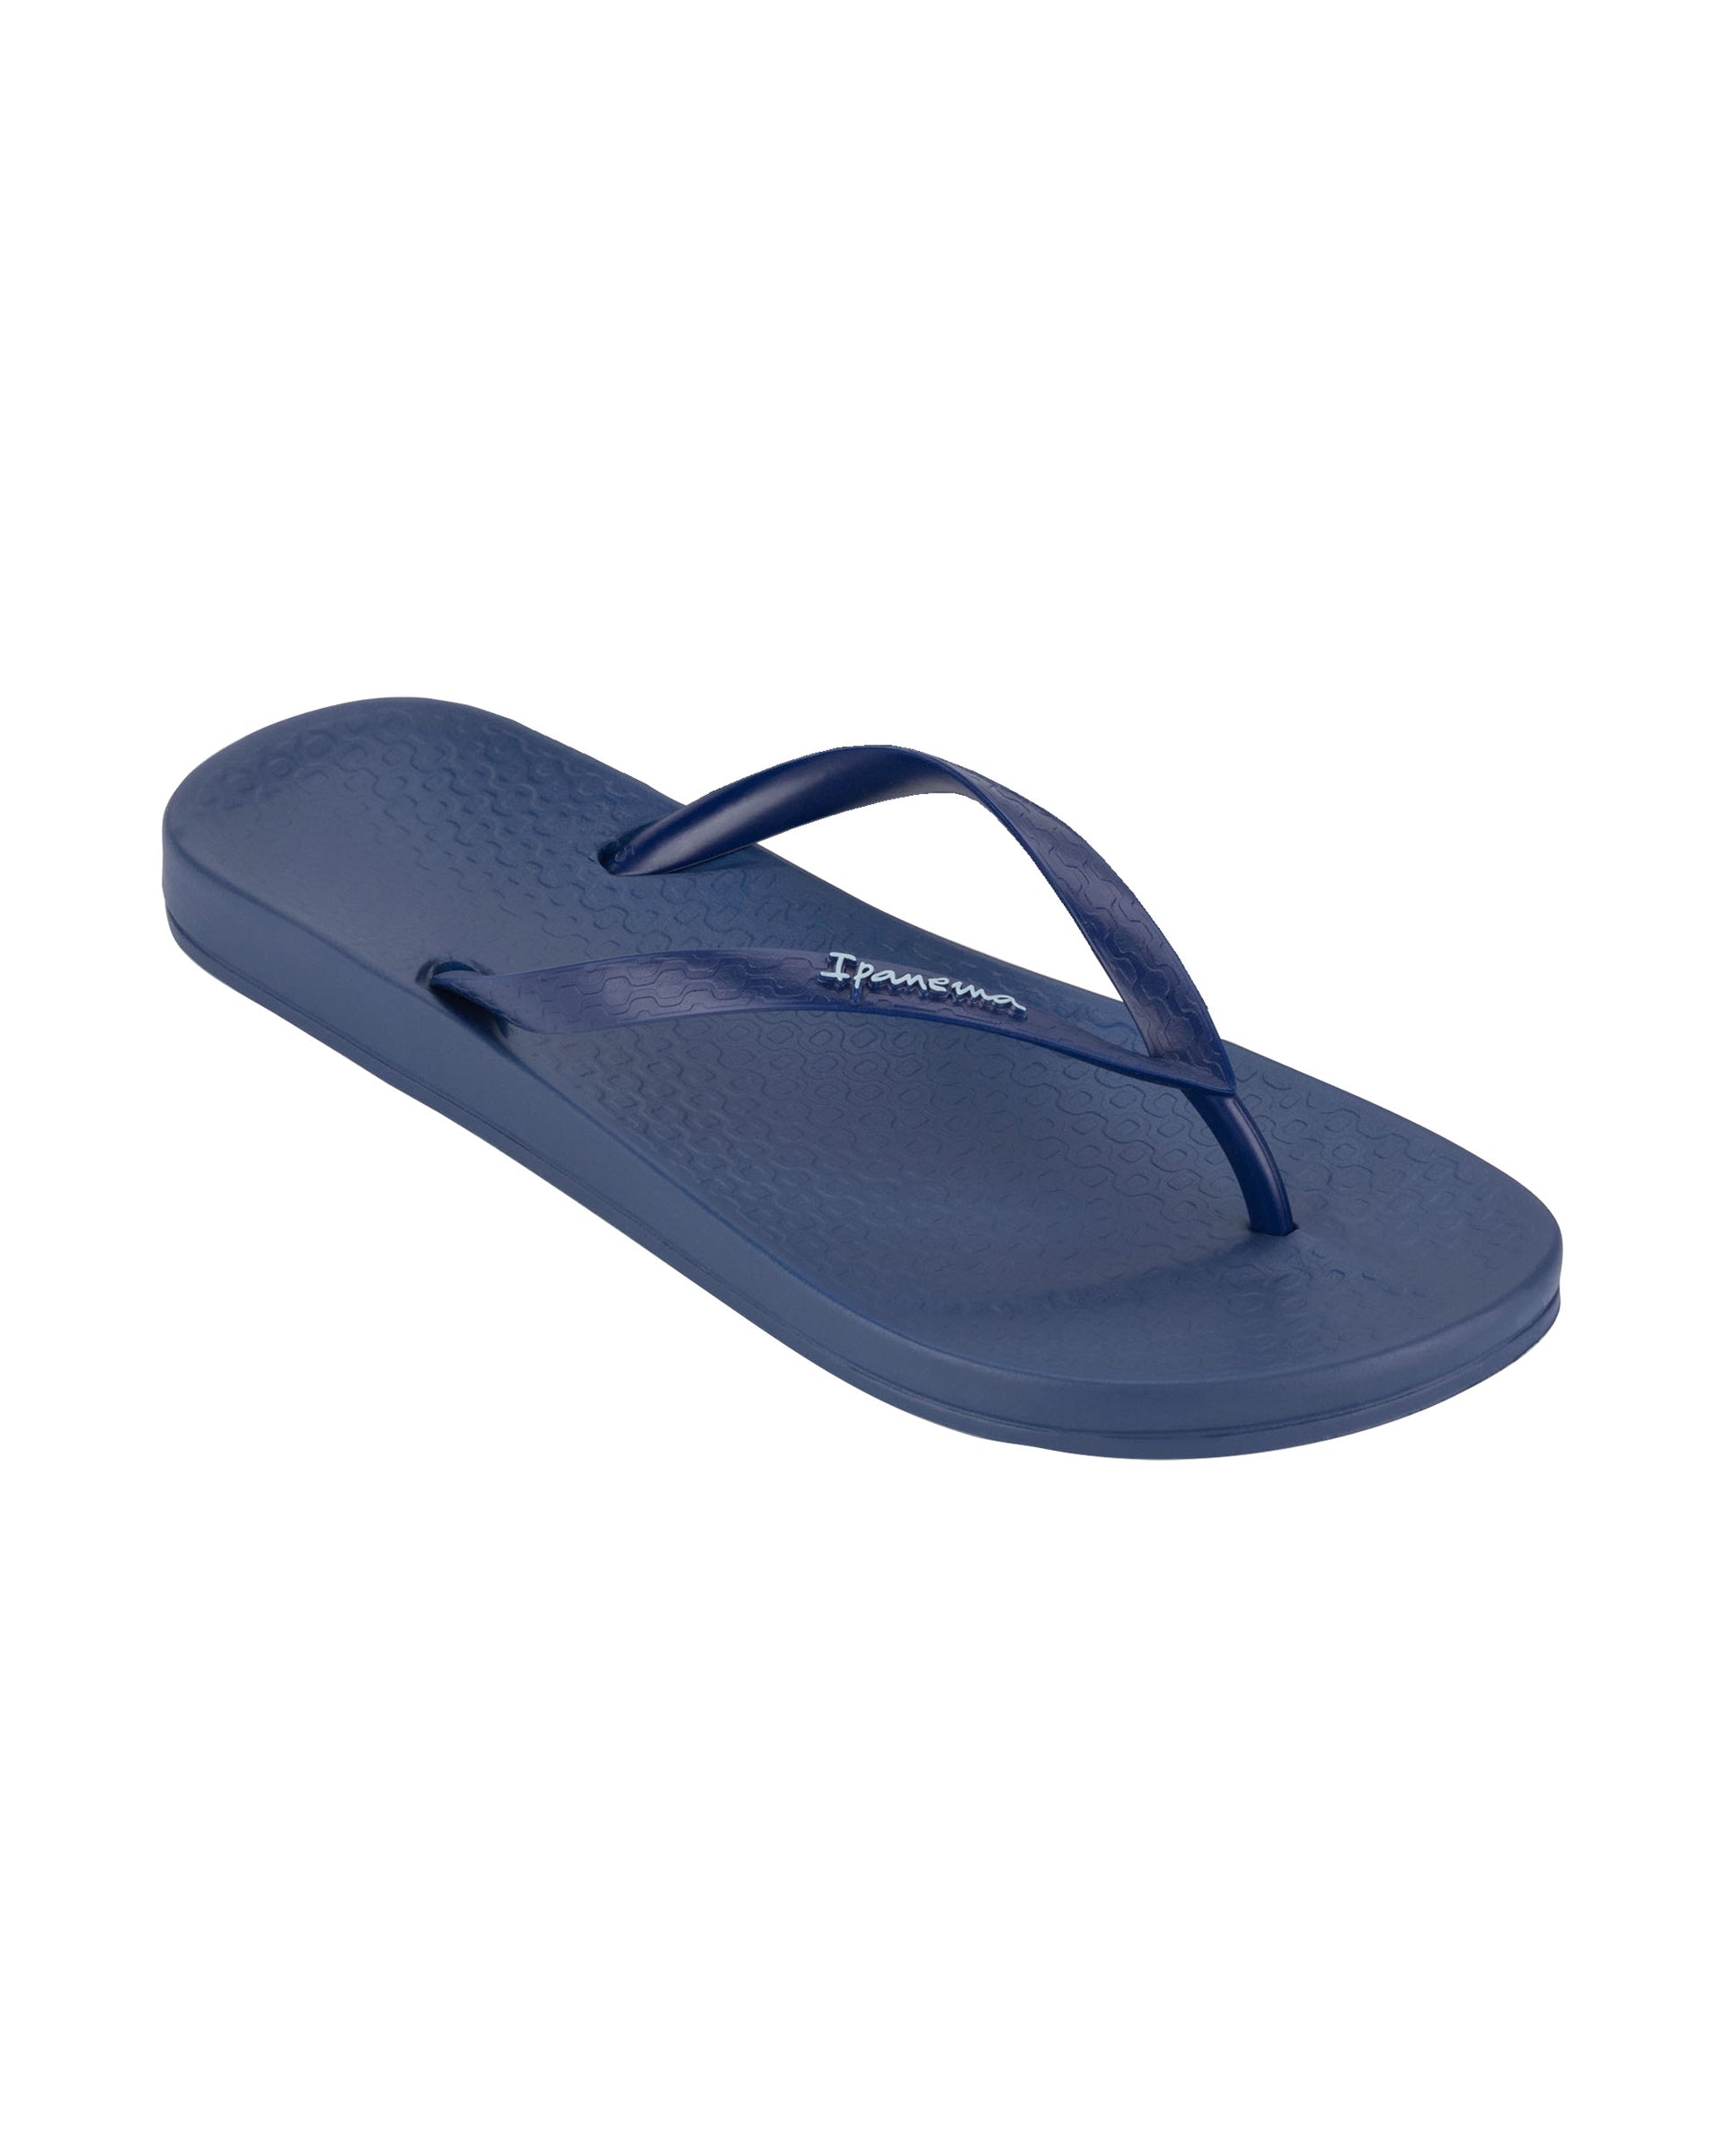 Angled view of a blue Ipanema Ana Colors women's flip flop.